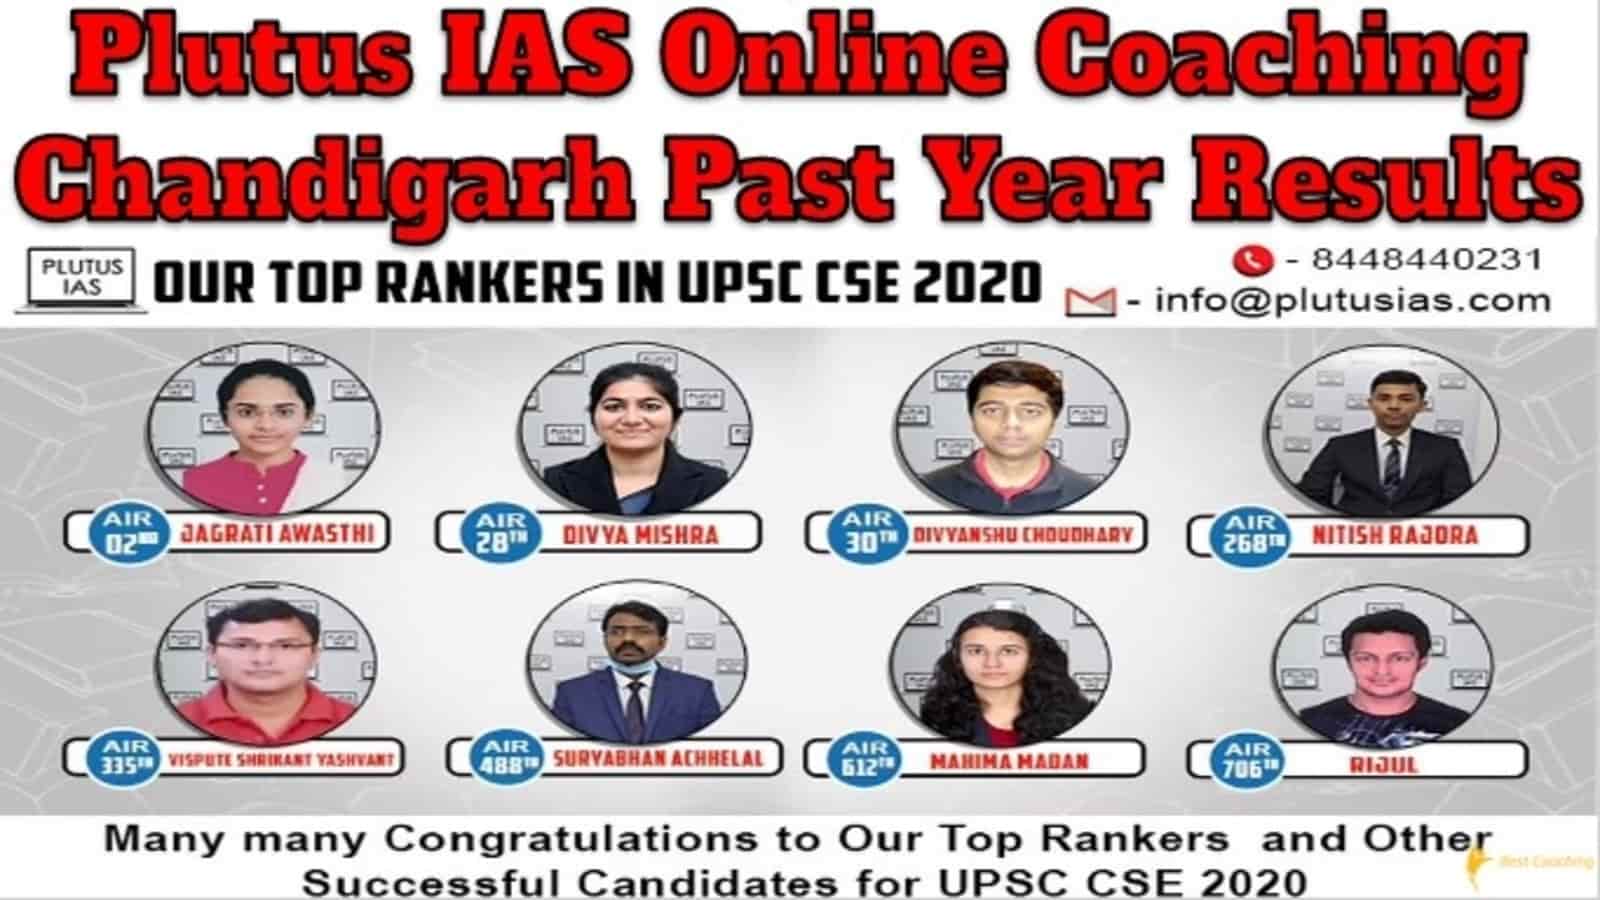 Plutus IAS Online Coaching Chandigarh Past Year Results